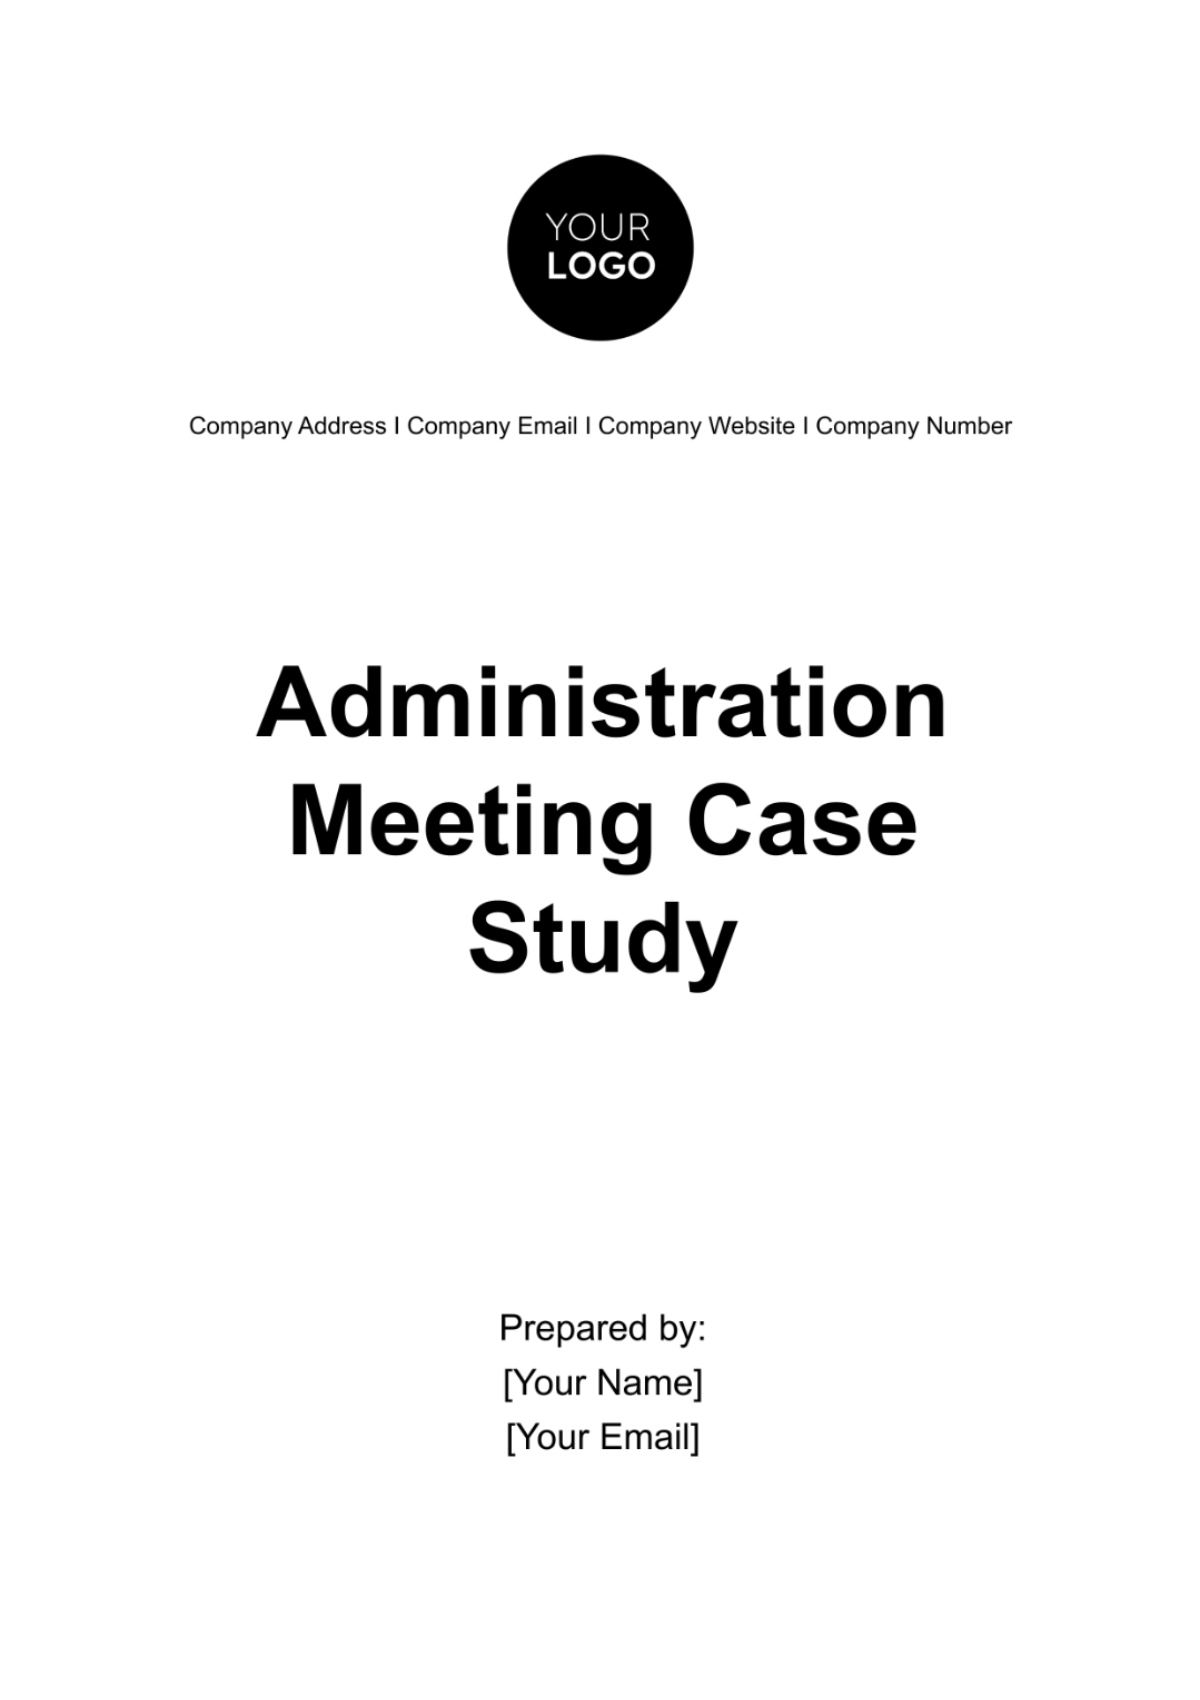 Administration Meeting Case Study Template